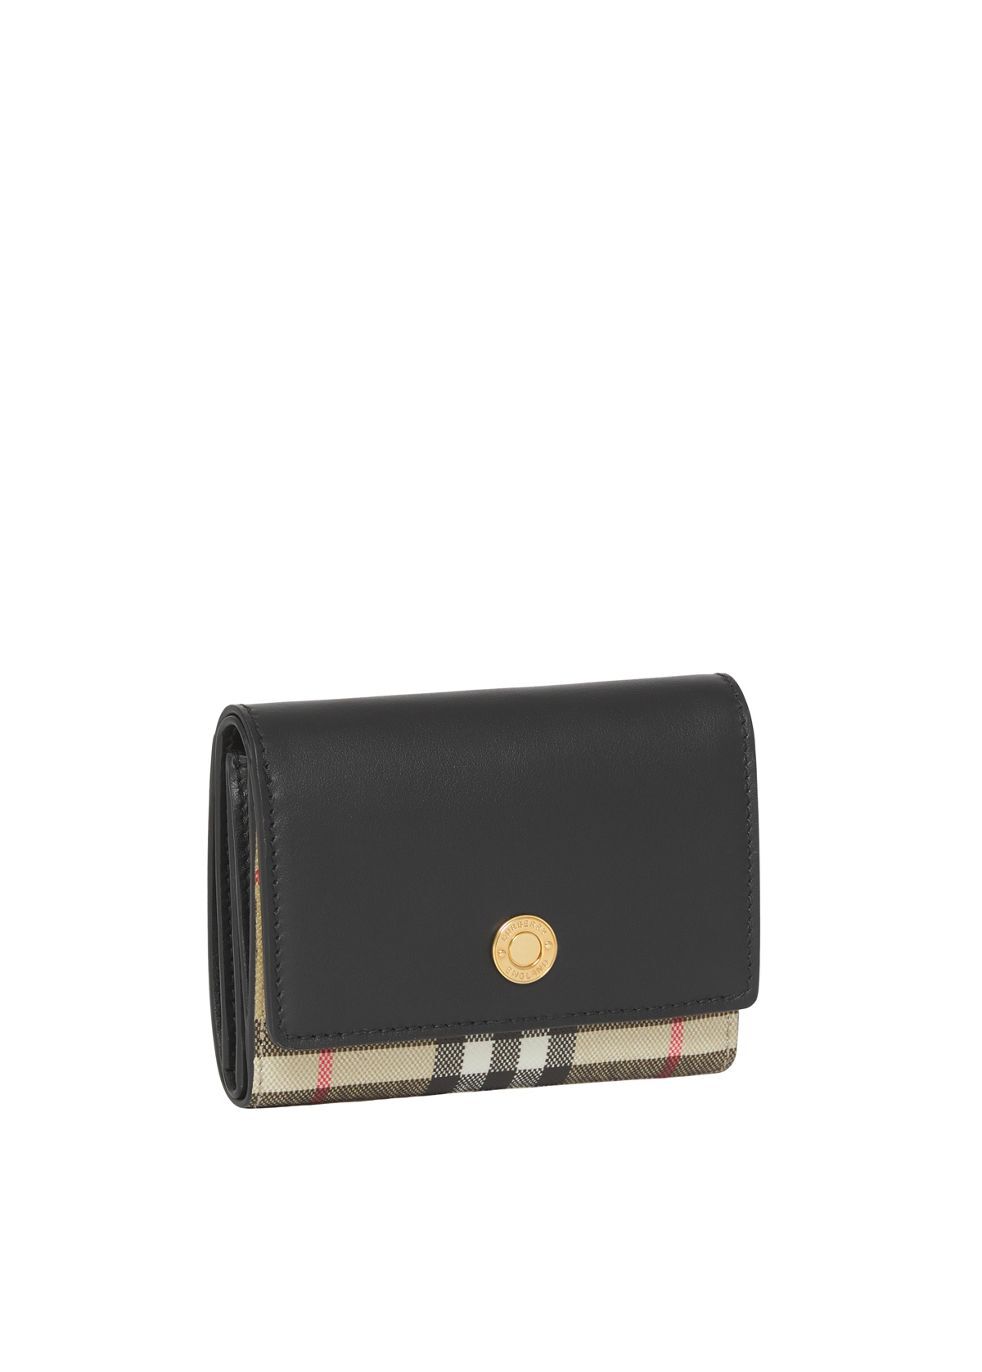 Lila Vintage Check and leather wallet